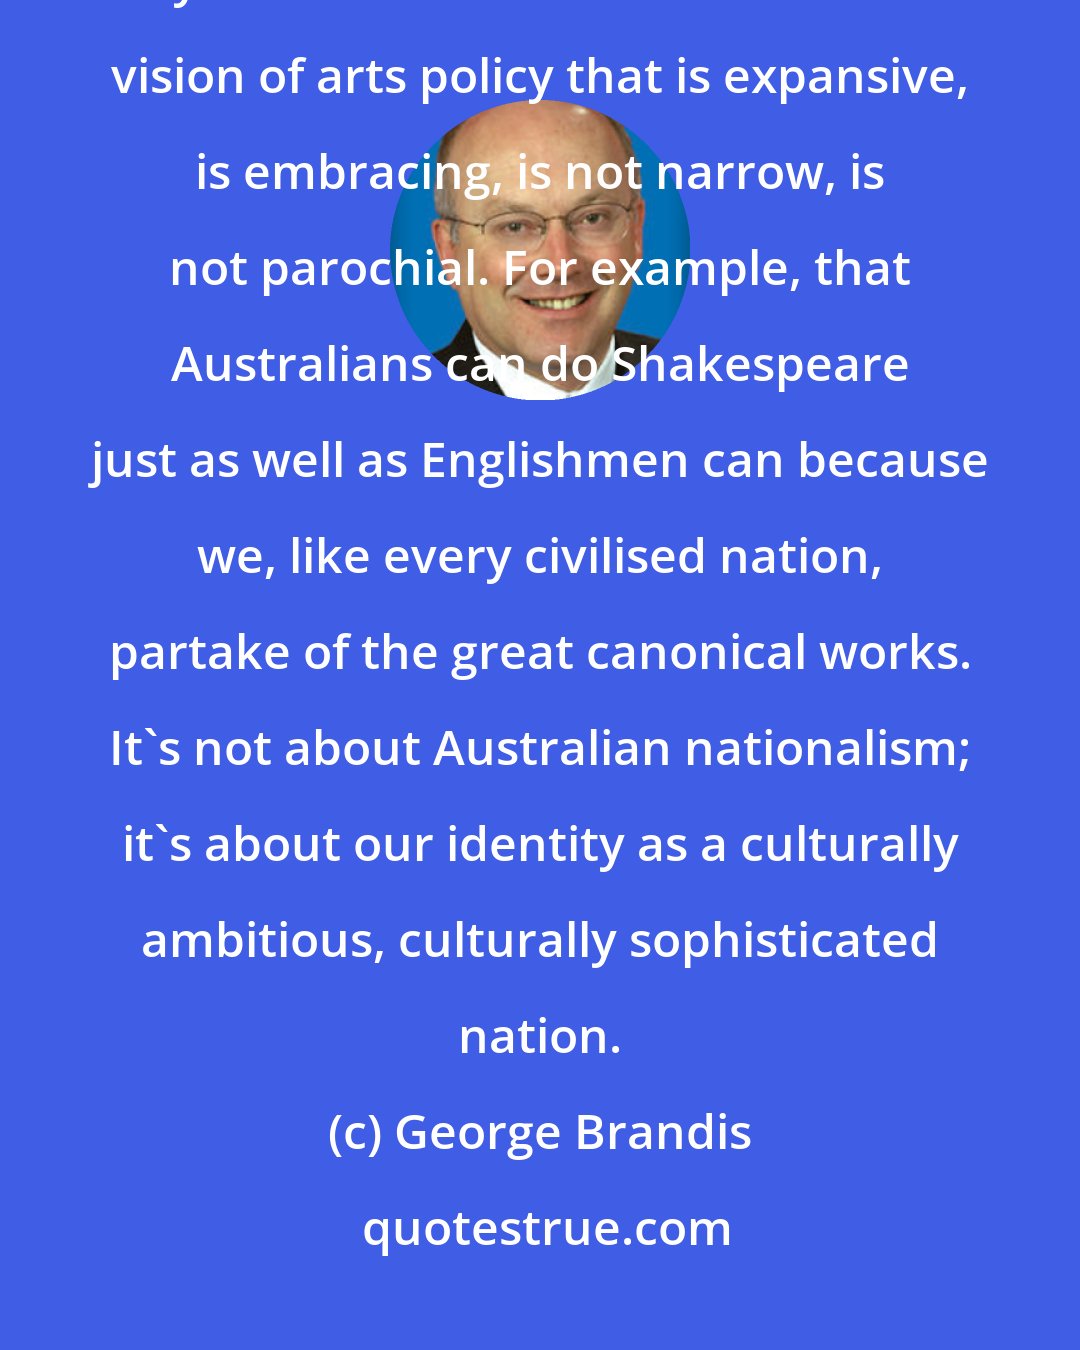 George Brandis: The great works belong to no one nation, no one cultural tradition even. They are universal.I want an Australian vision of arts policy that is expansive, is embracing, is not narrow, is not parochial. For example, that Australians can do Shakespeare just as well as Englishmen can because we, like every civilised nation, partake of the great canonical works. It's not about Australian nationalism; it's about our identity as a culturally ambitious, culturally sophisticated nation.